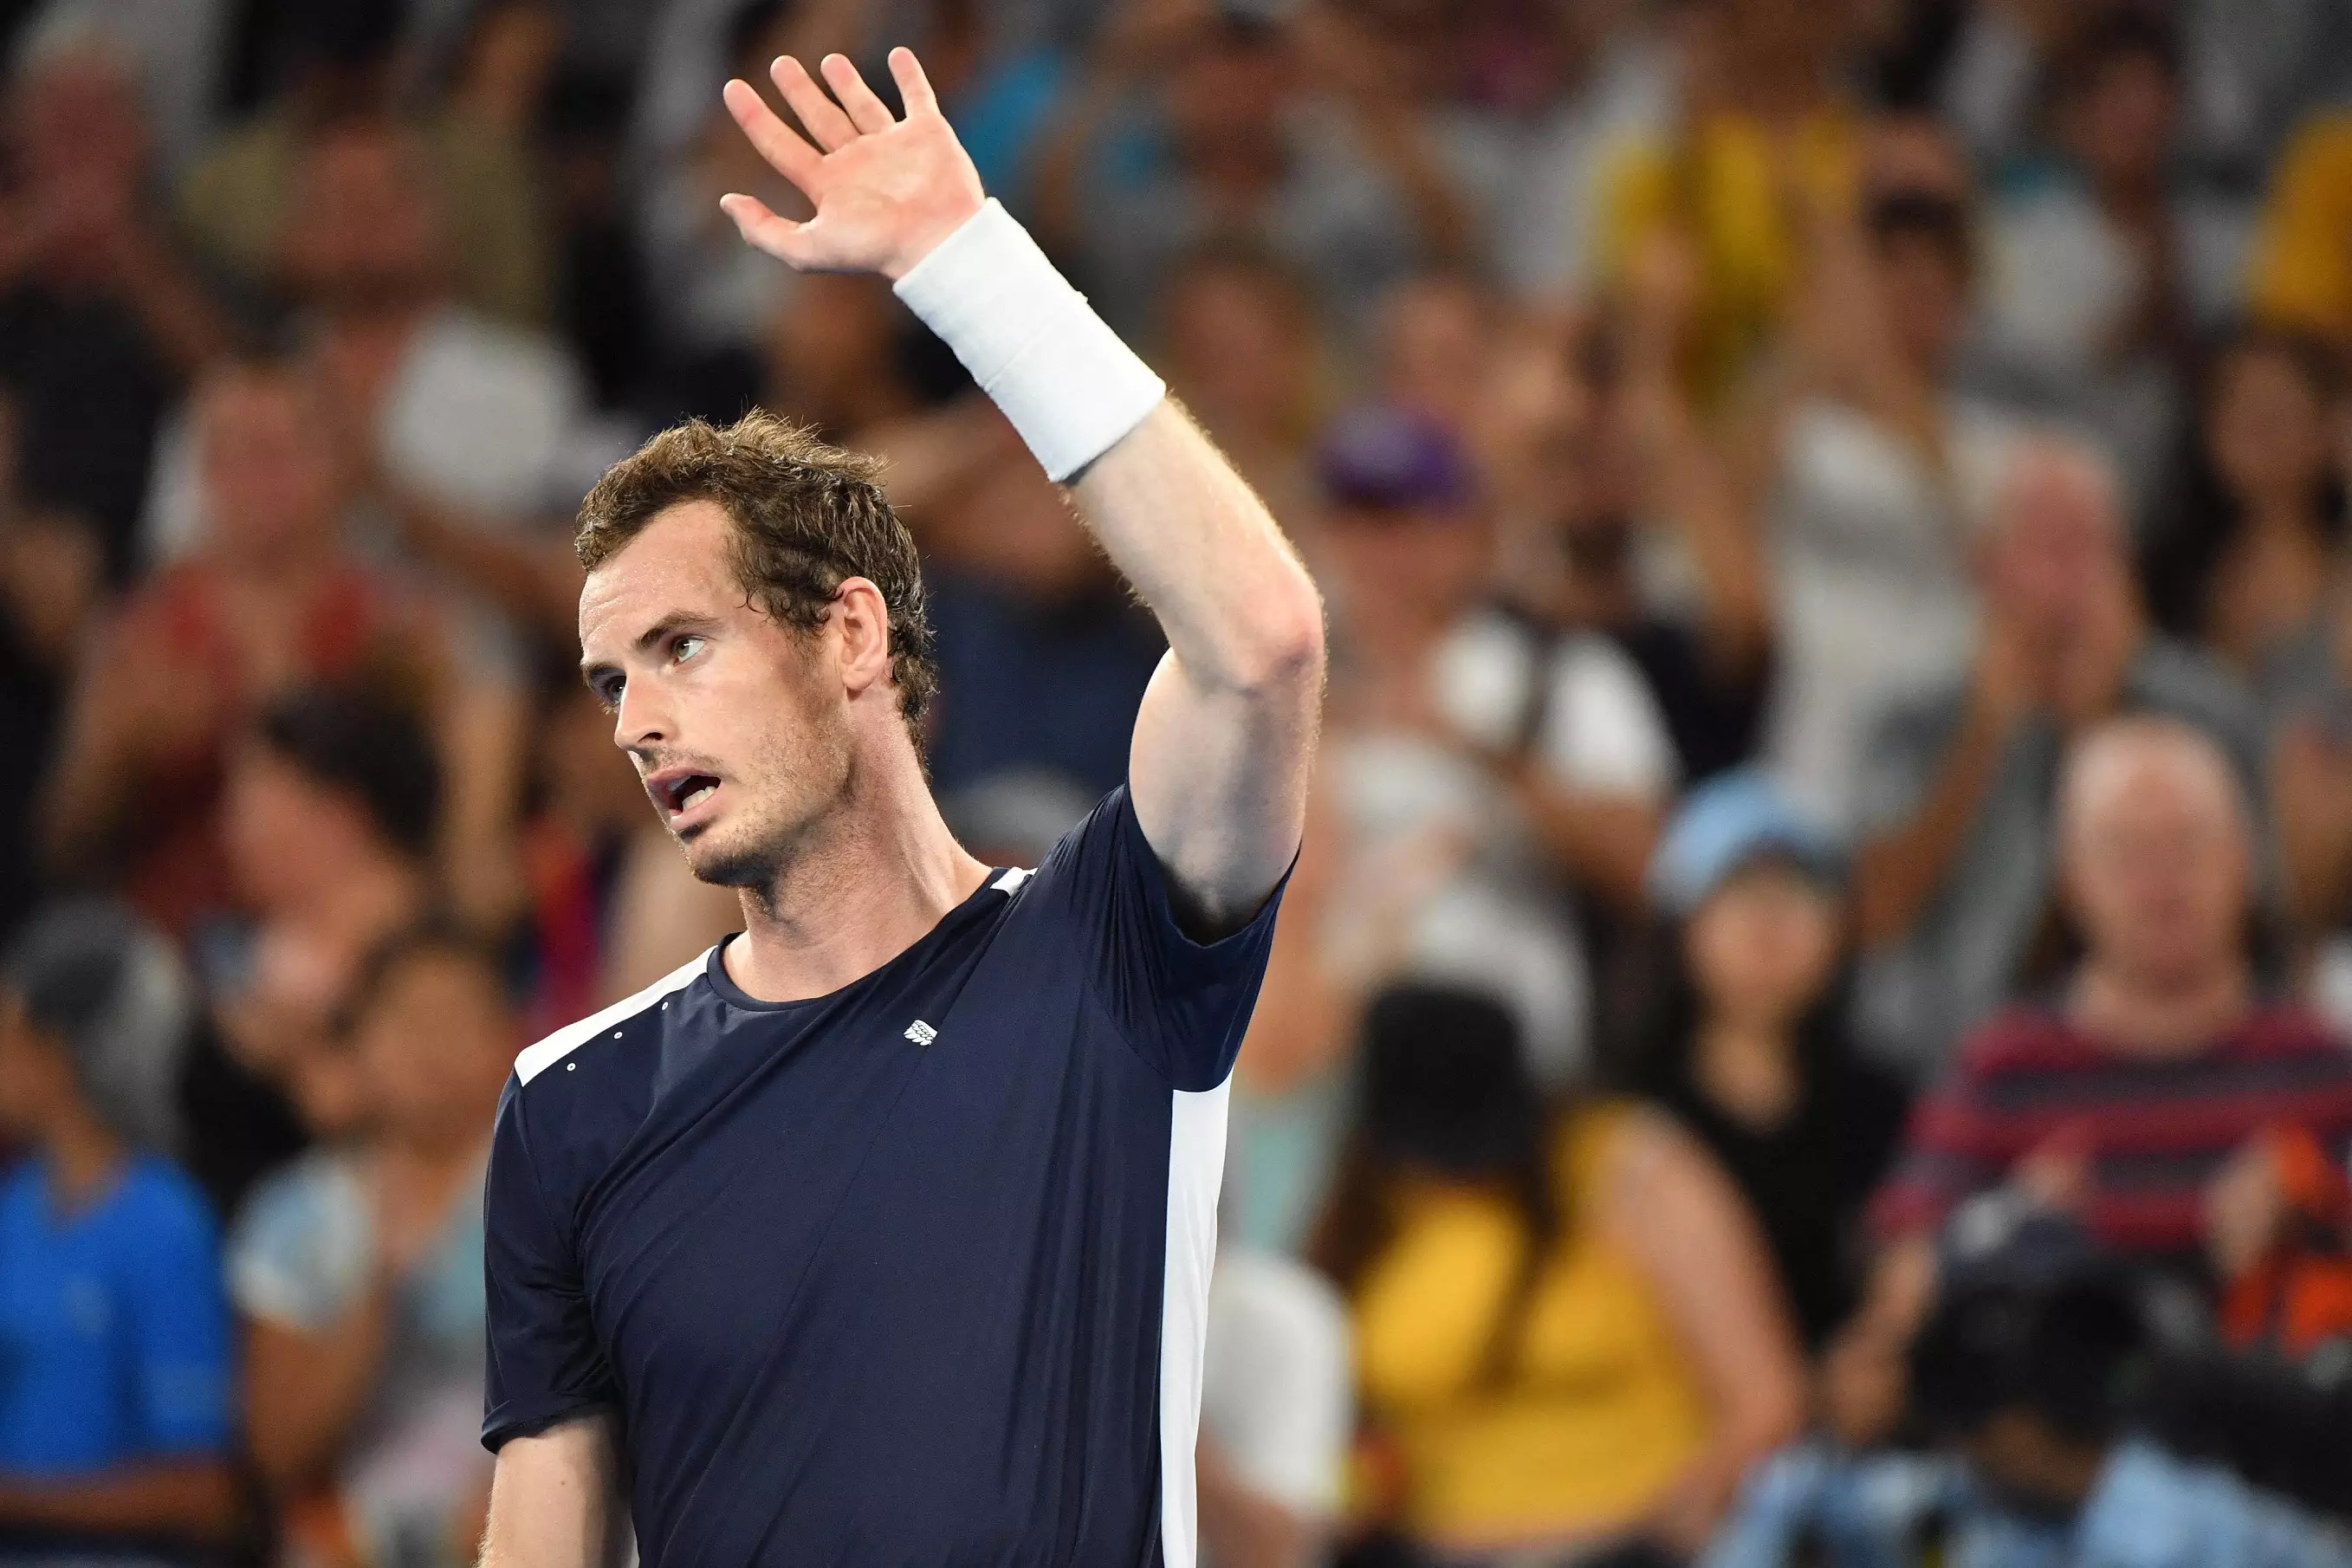 Will we see Andy Murray on court again?